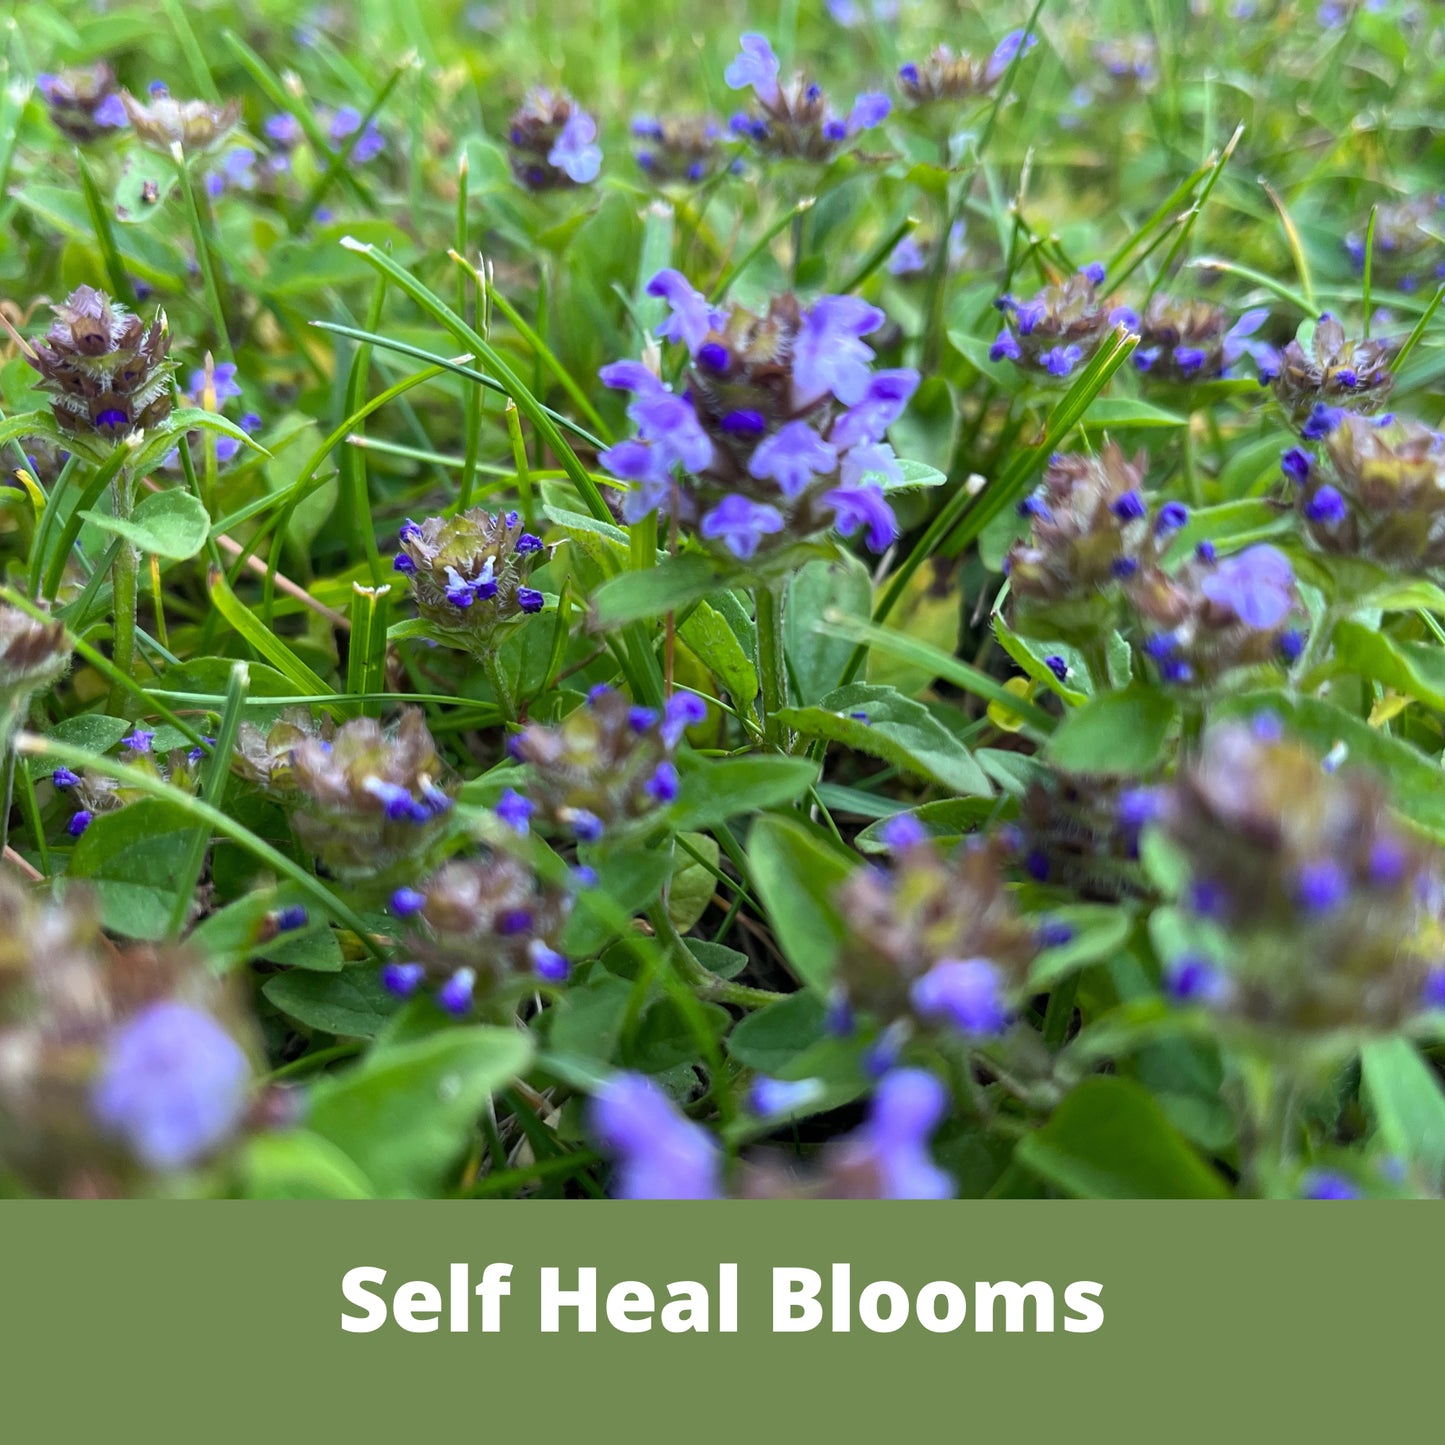 Slope/Septic System Kit with Dutch White Clover, Self-Heal & White Yarrow